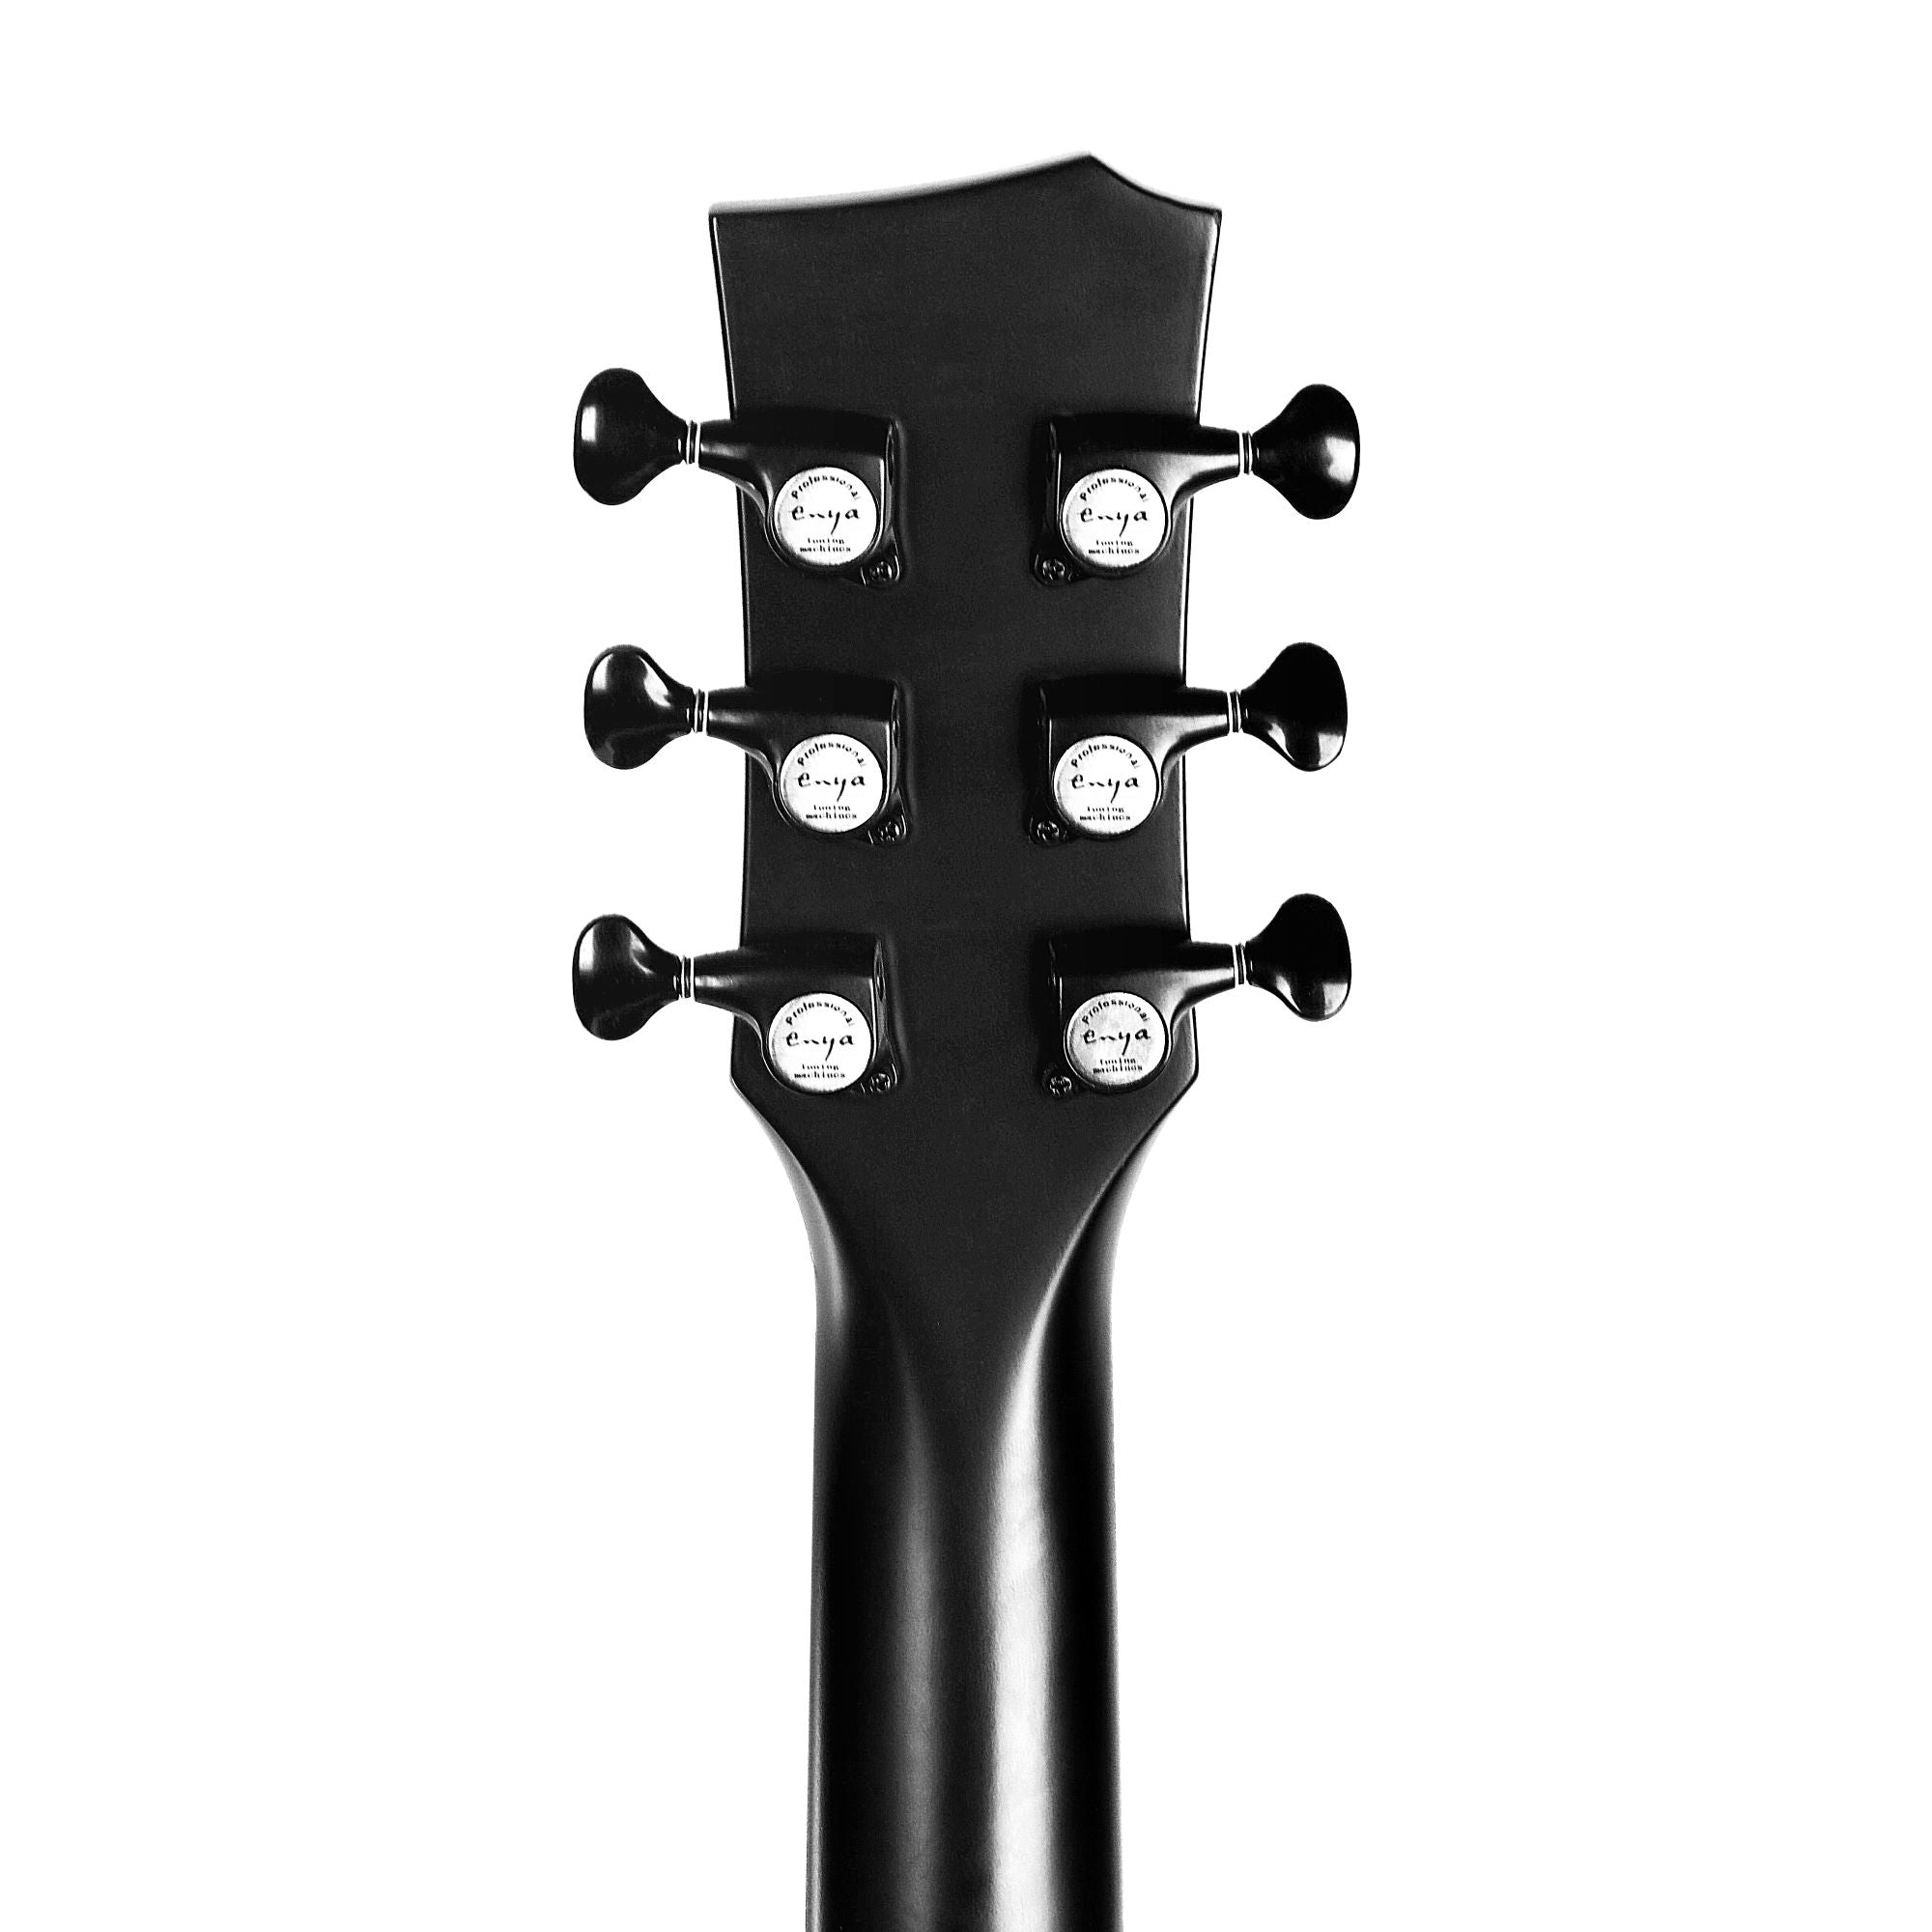 Enya EA-X2C PROe 41" Acoustic Guitar & Transacoustic-S3 Pickup With Bag And Accessories | ENYA , Zoso Music